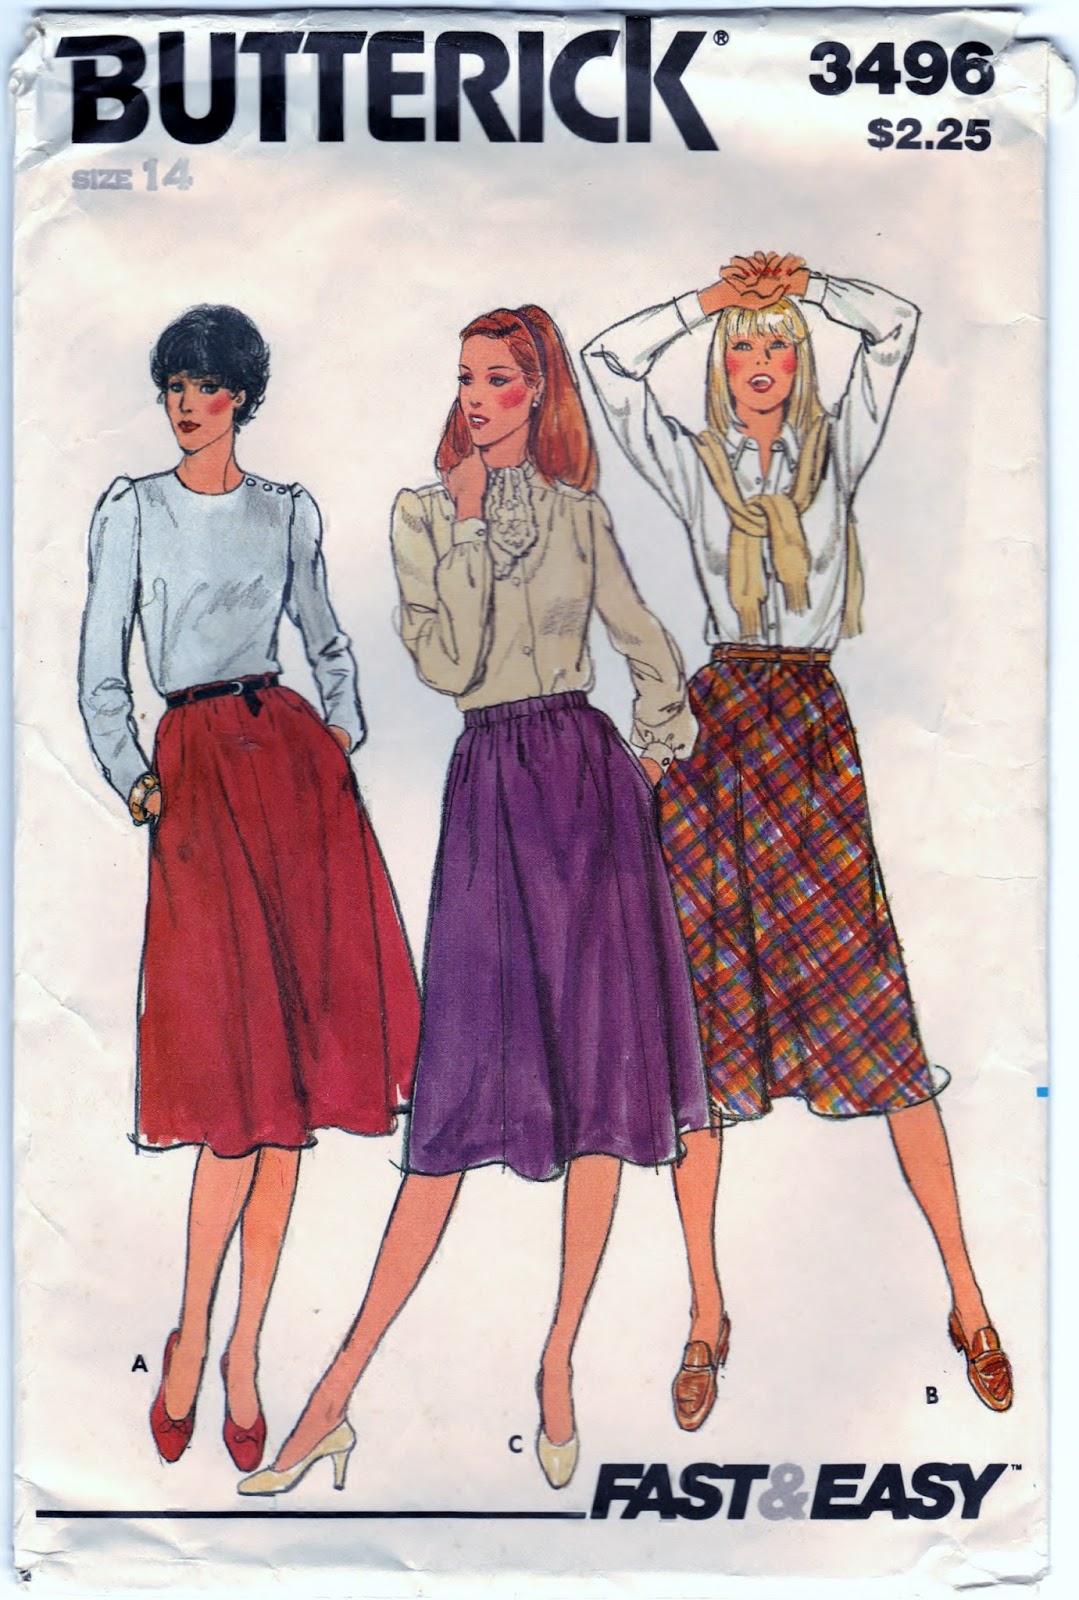 https://www.etsy.com/listing/222068596/butterick-3496-sewing-craft-pattern